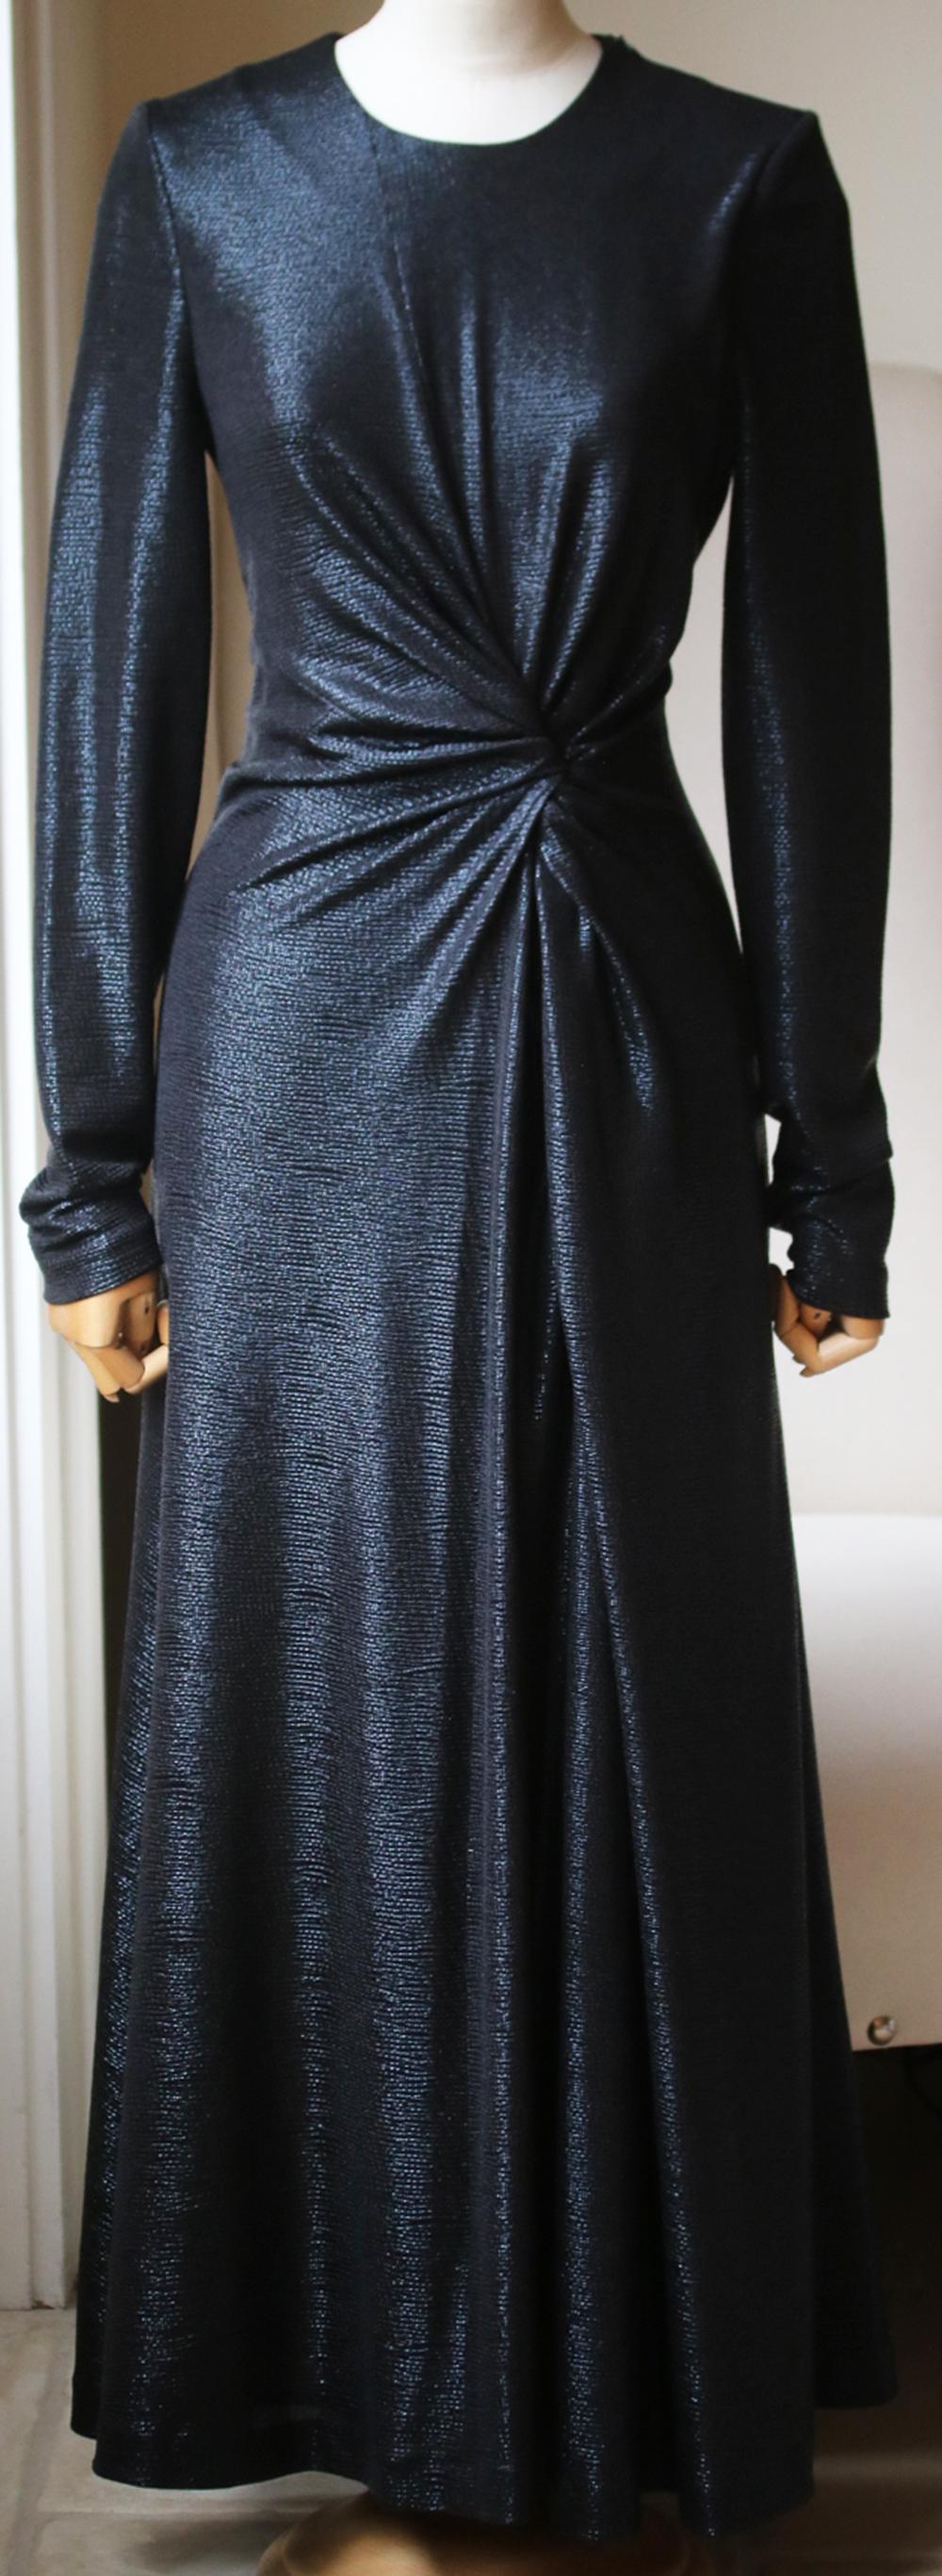 Shimmering metallic dress with a twist-front detail that drapes down to a swinging skirt that has a thigh-high side slit. Round neck. Long sleeves. Concealed zip closure. In black. 95% polyester, 5% spandex. 

Size: UK 10 (UK 6, FR 38, IT